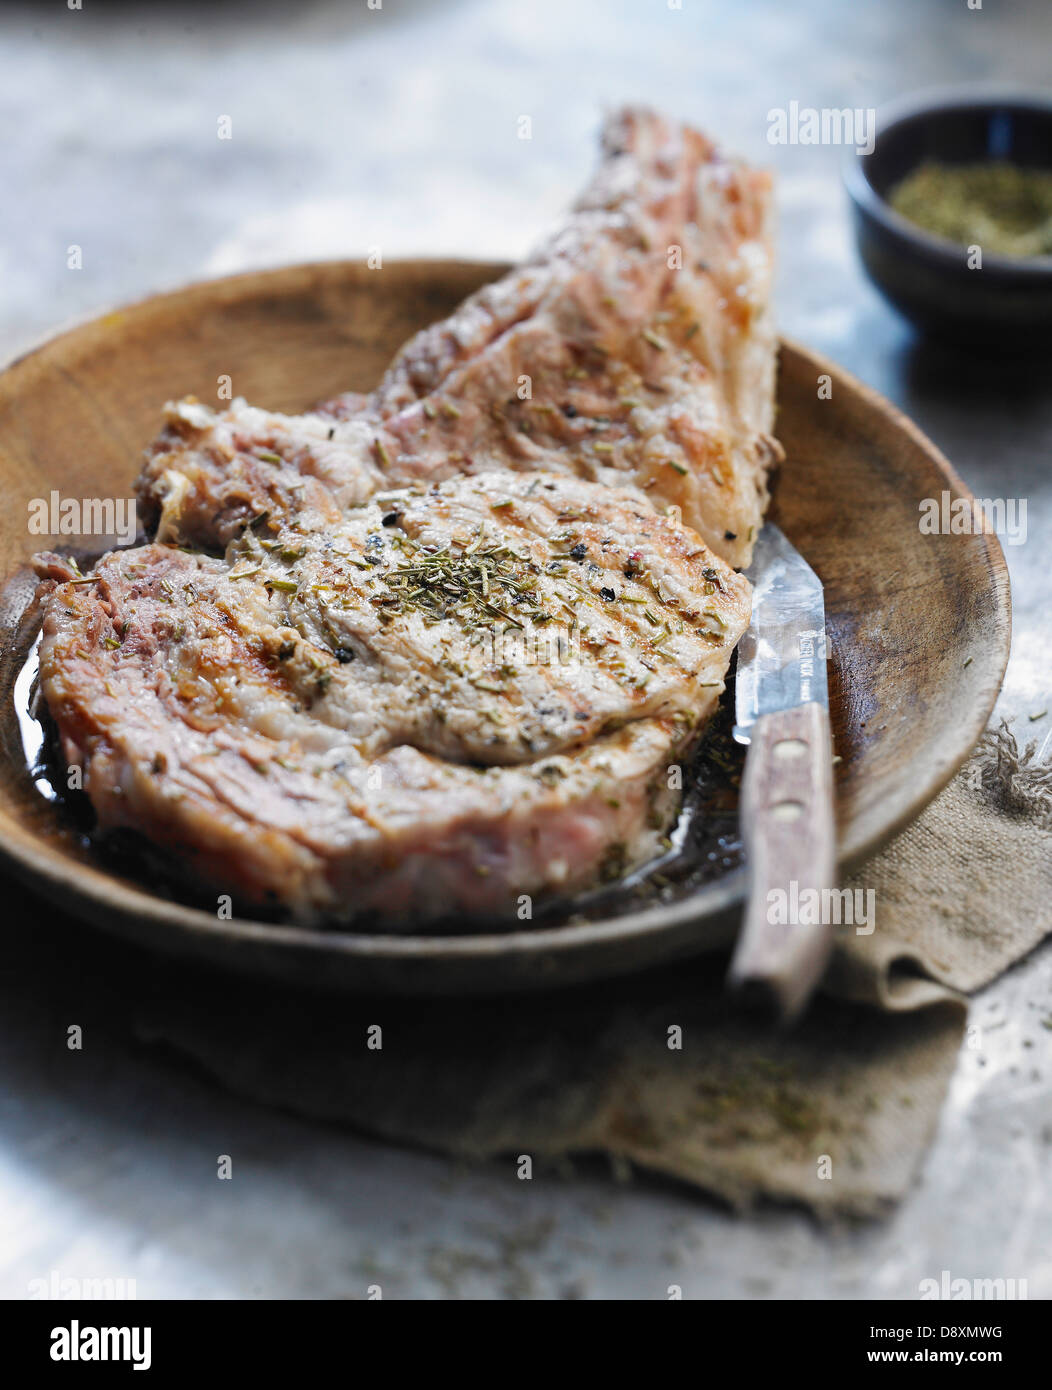 Grilled veal chop with herbs Stock Photo